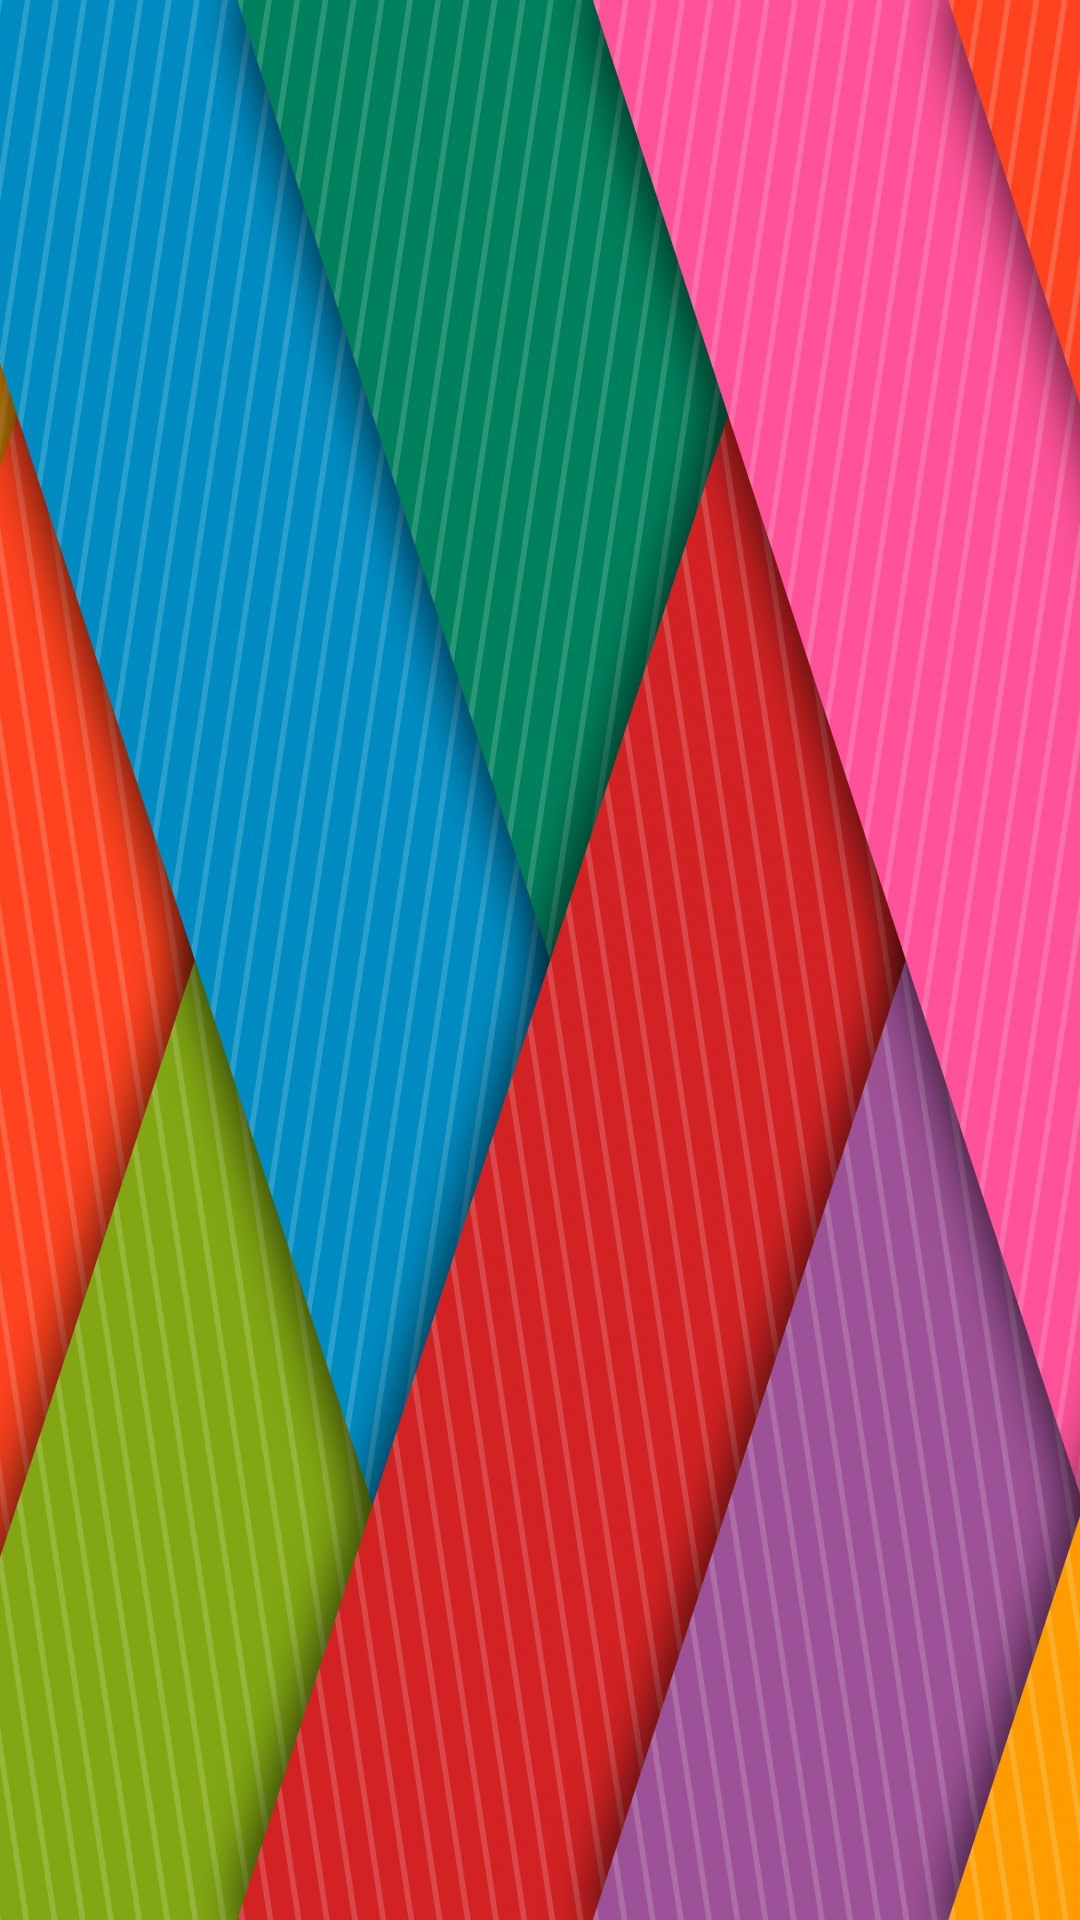 Red Blue and Green Striped Textile. Wallpaper in 1080x1920 Resolution